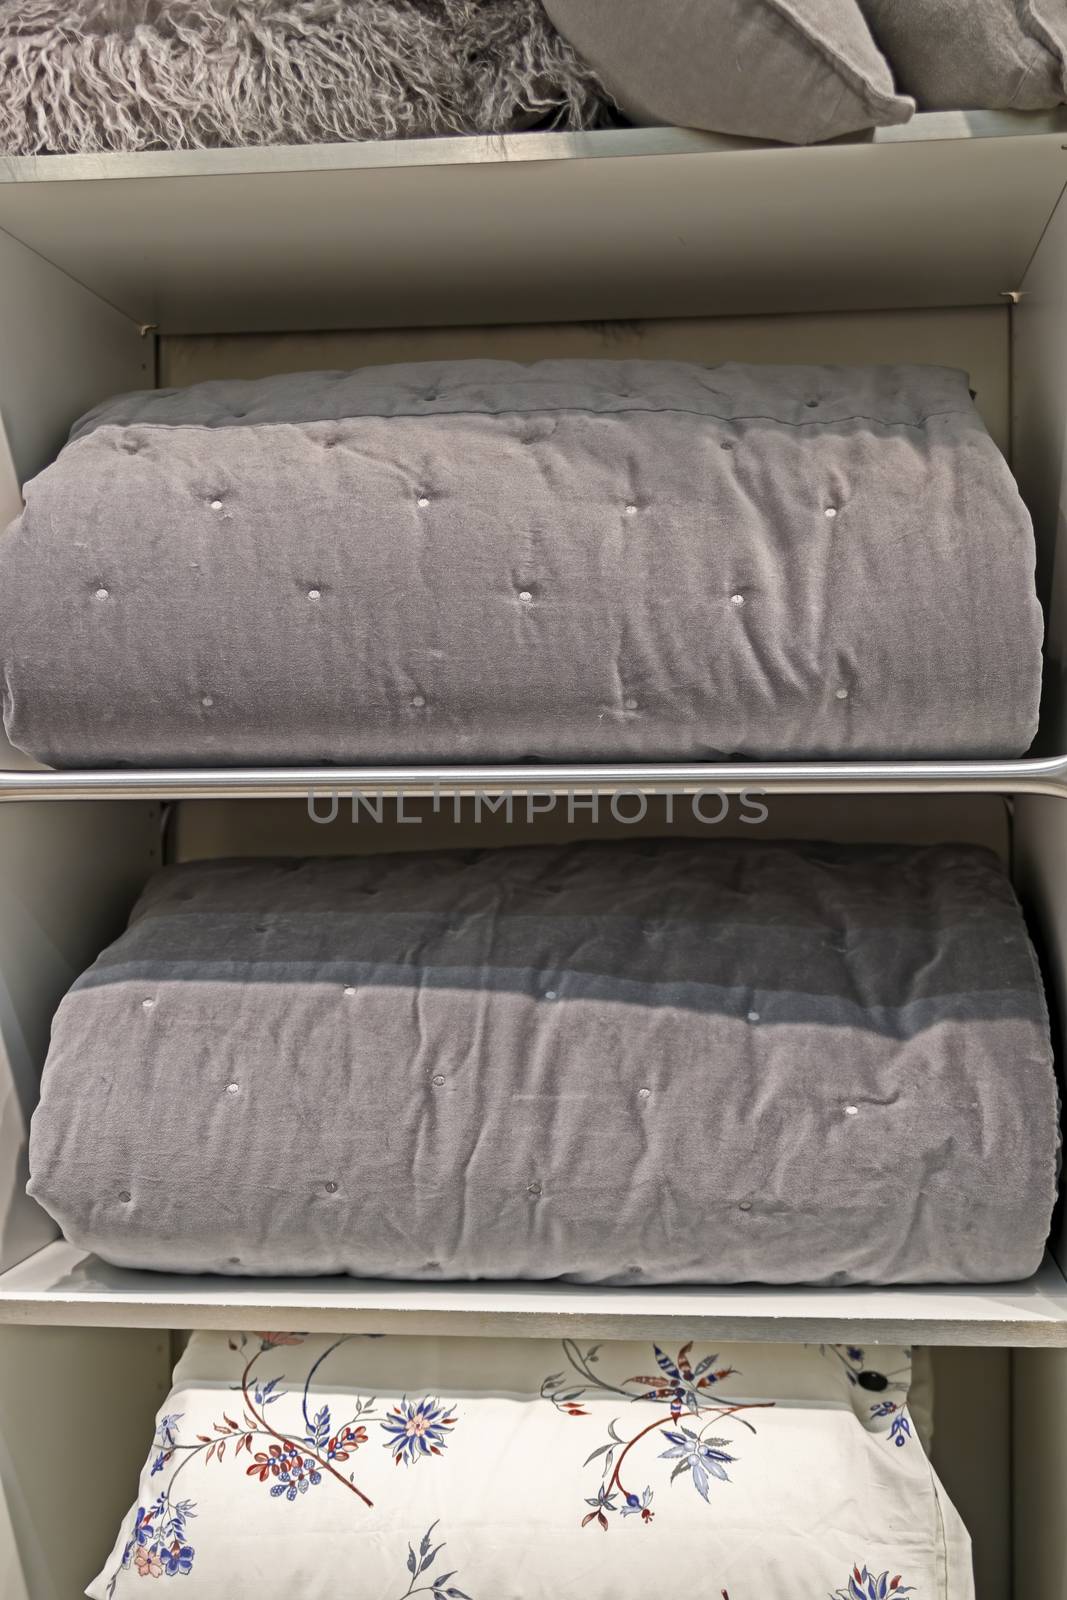 Folded thick blankets designed for the cold season. Grey, natural material.